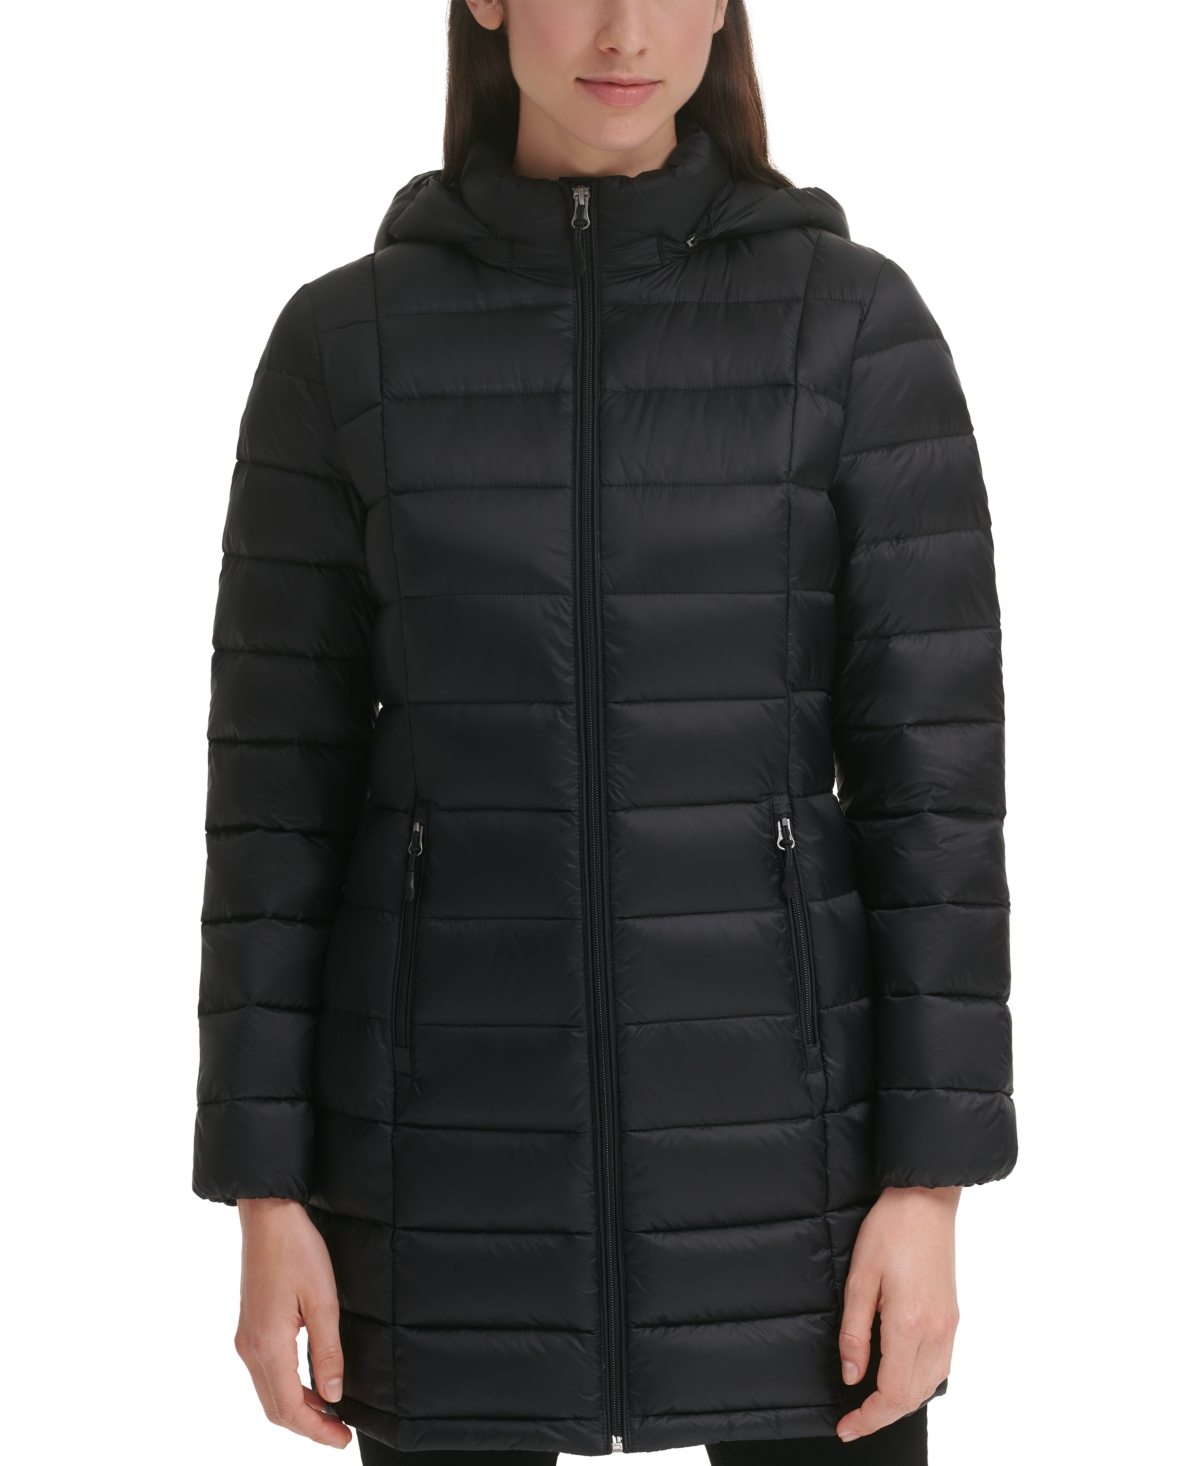 Charter Club Women's Packable Hooded Down Puffer Coat, Created for Macy's